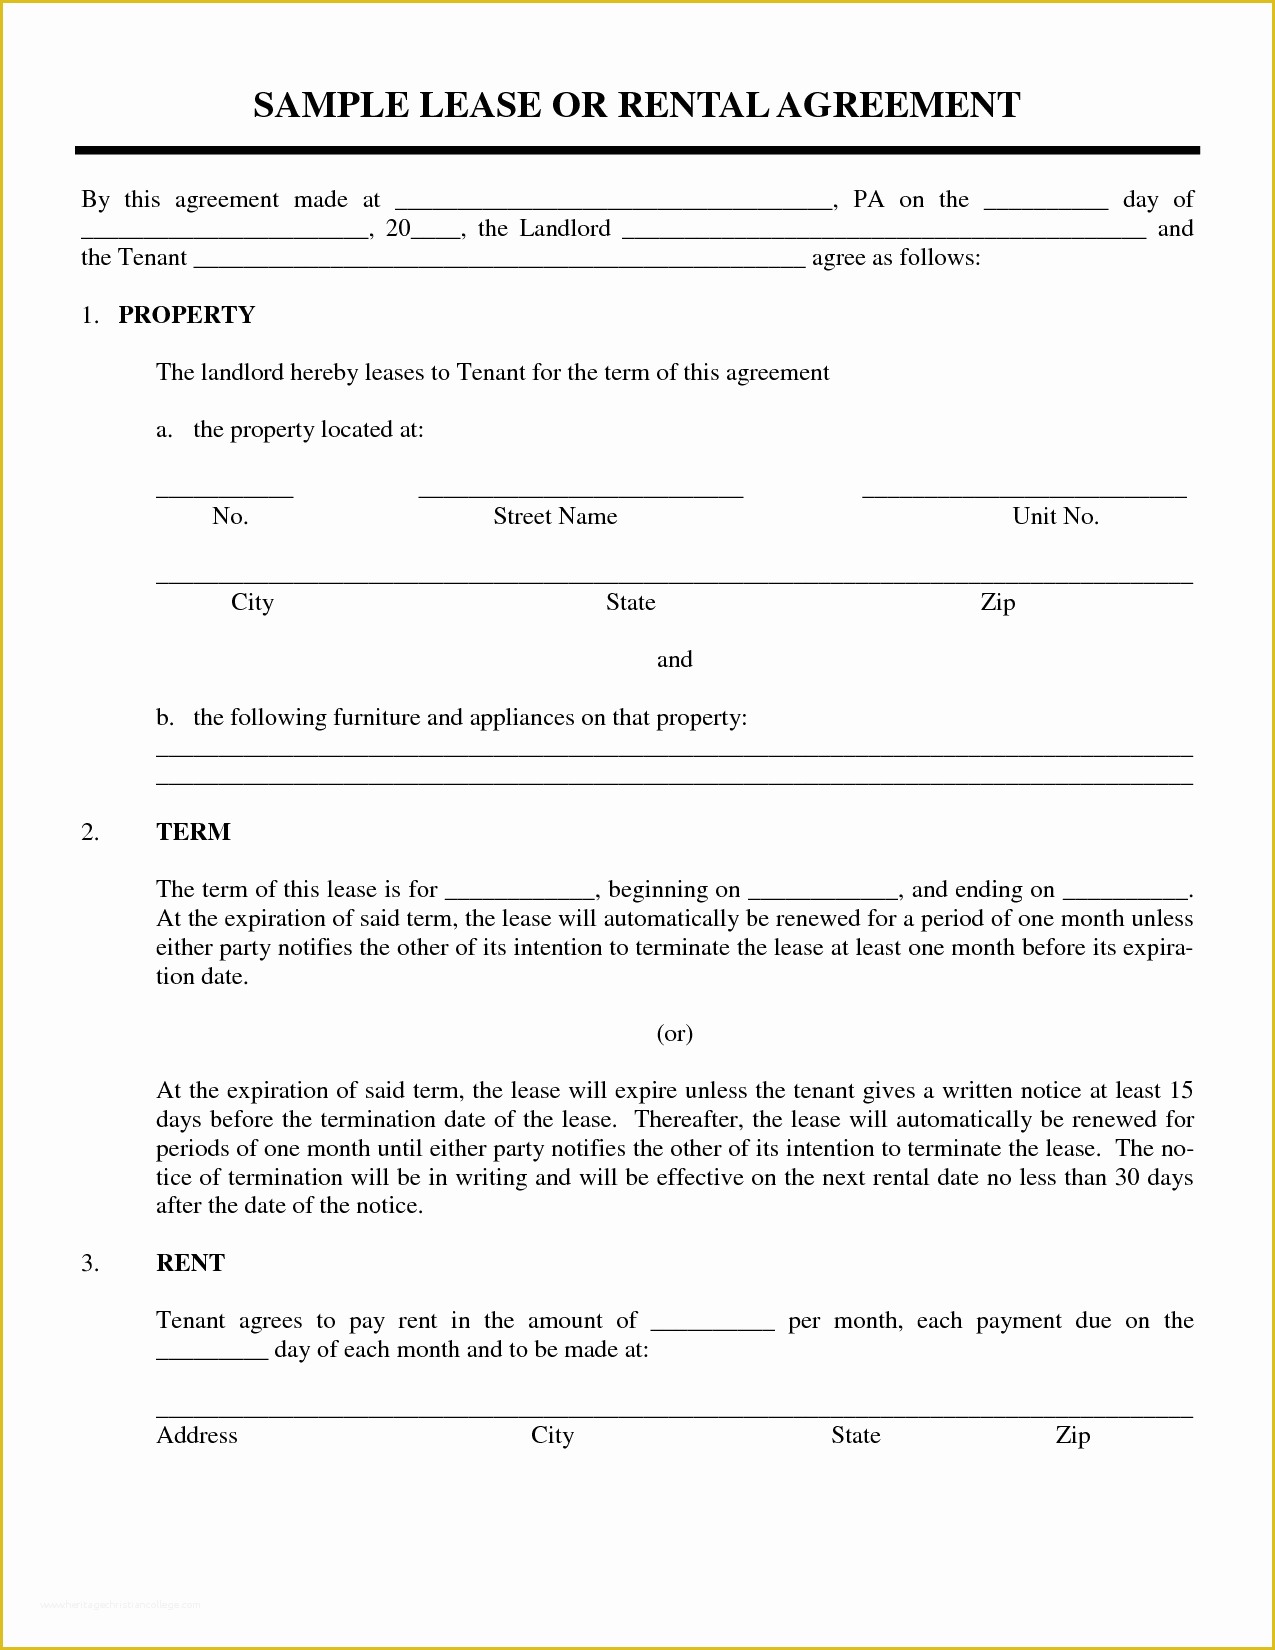 Rental Agreement Template Free Of Sample Lease or Rental Agreement